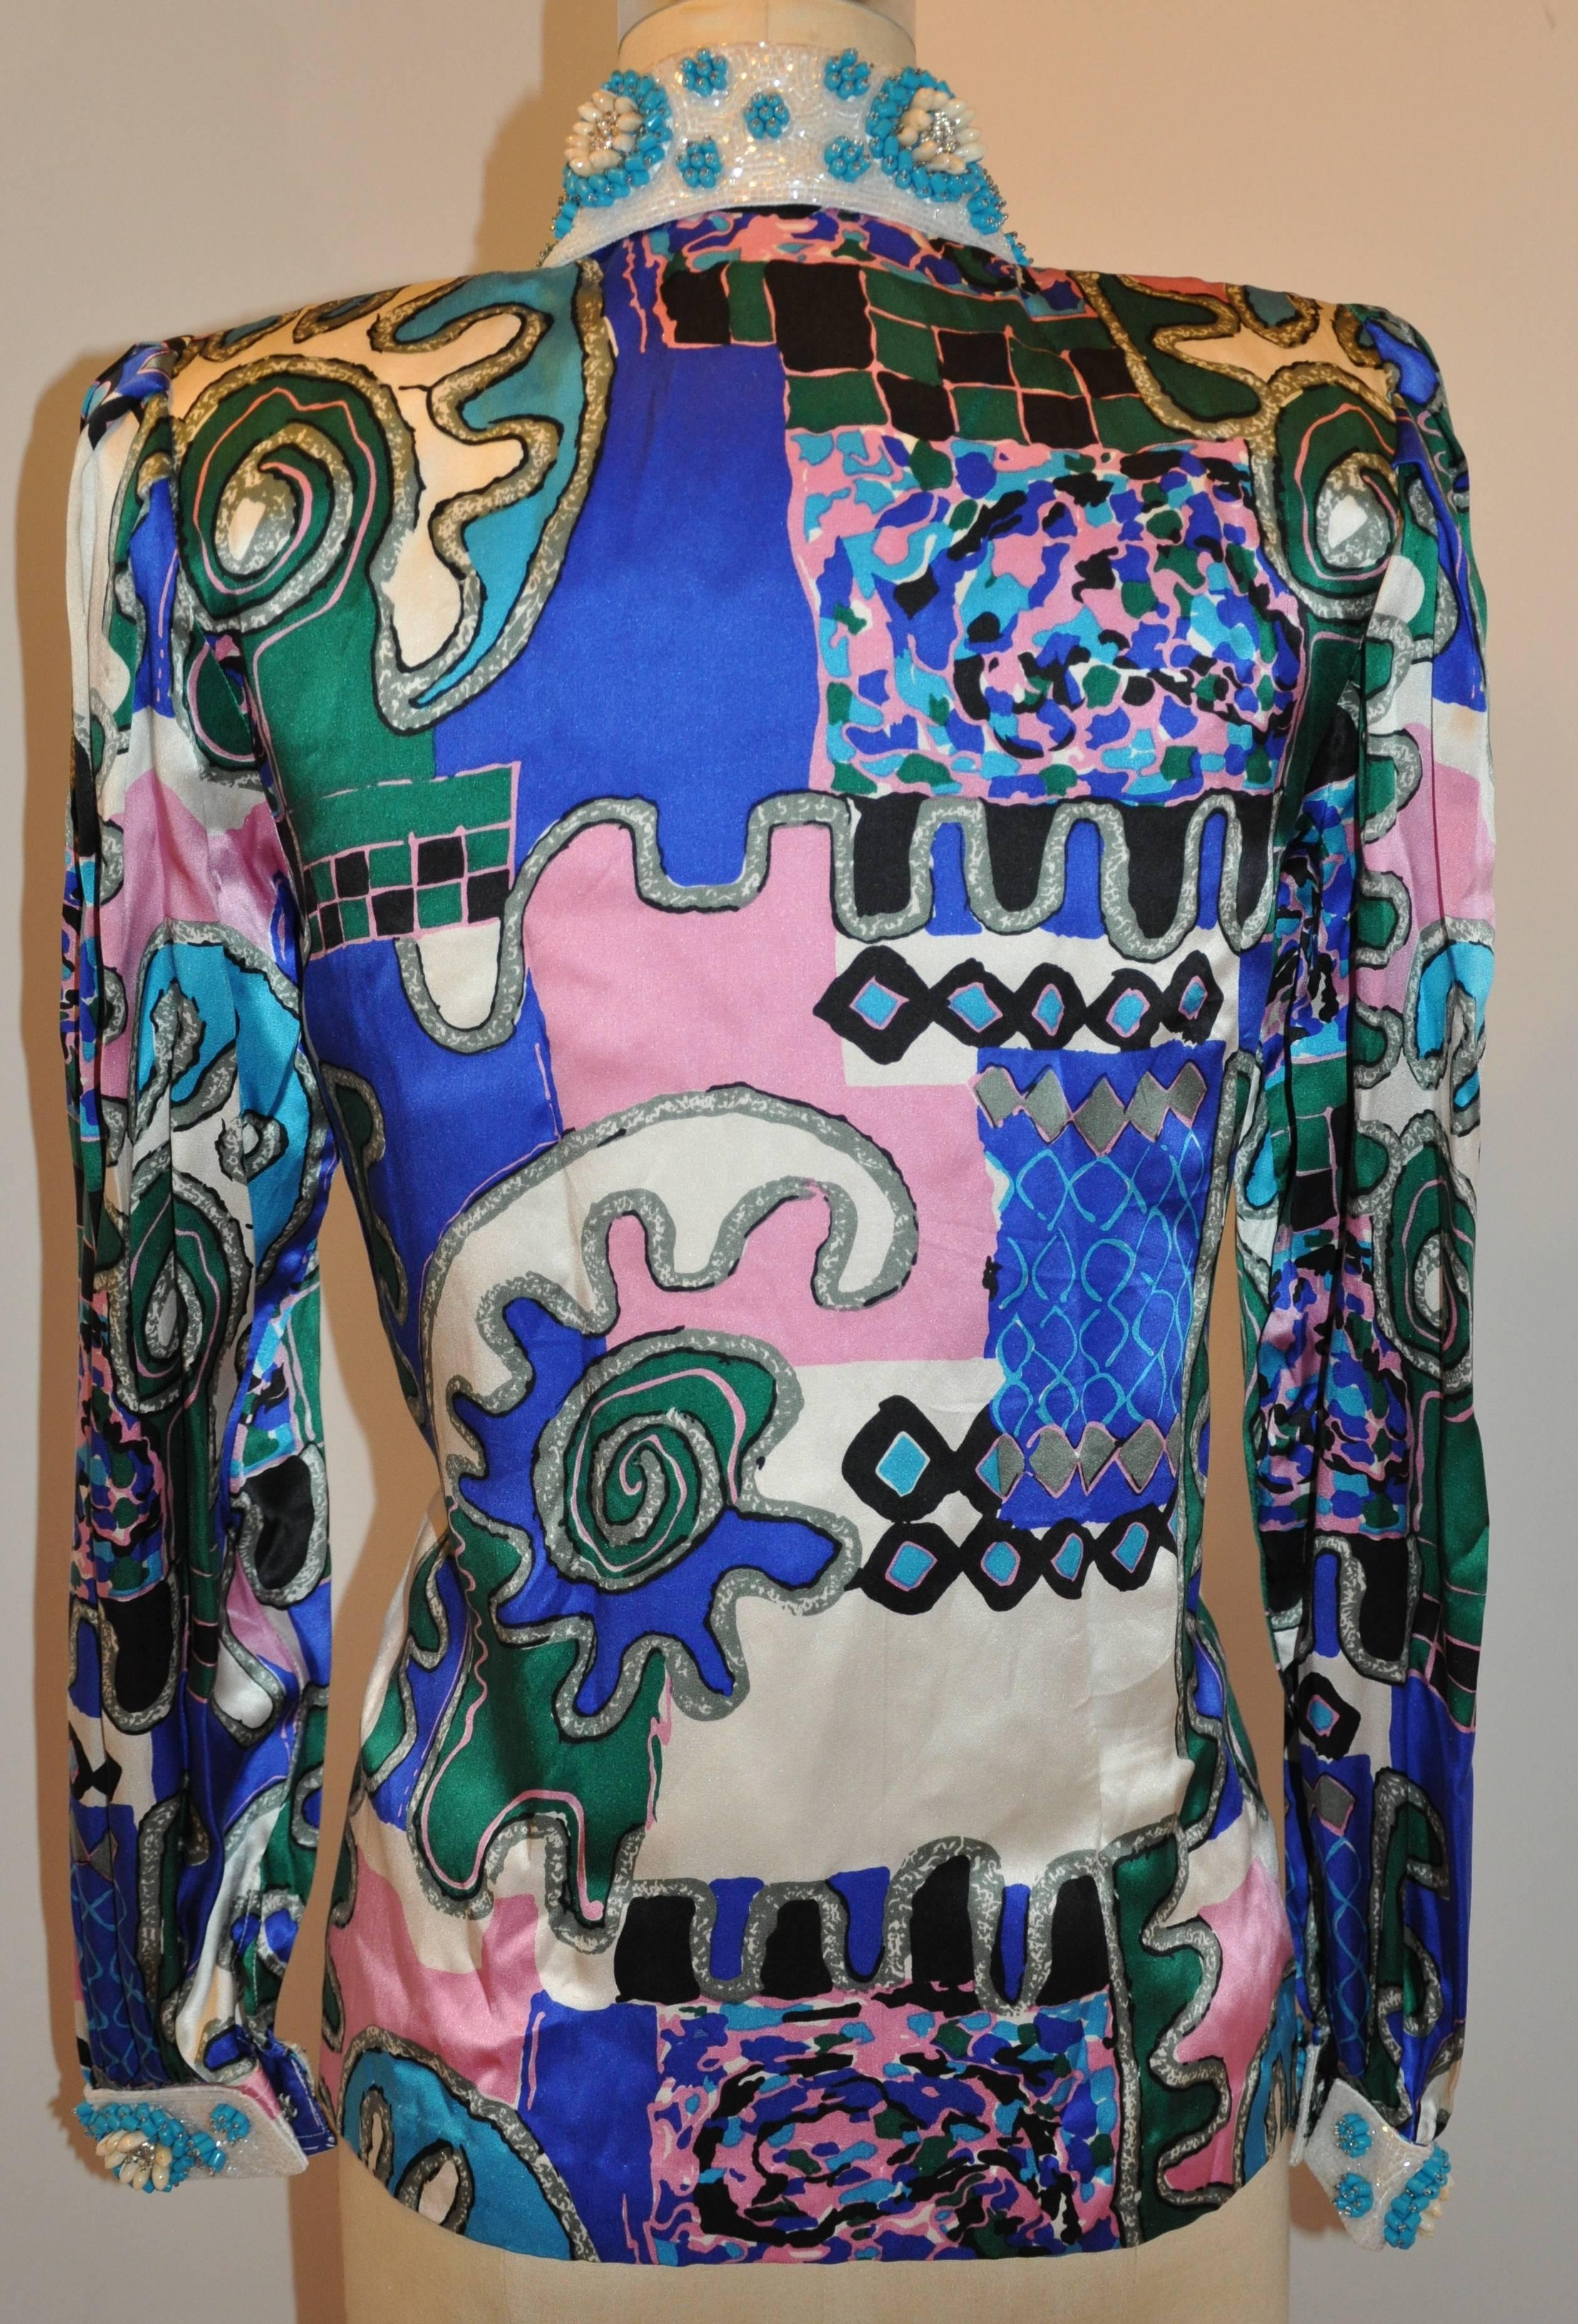      Yves Saint Laurent bold multi-color Abstract silk blouse embellished with micro beaded as well as turquoise shades and shells along the collar and cuffs as well as the front embellished buttons. The front has hidden hook & eyes for closing with